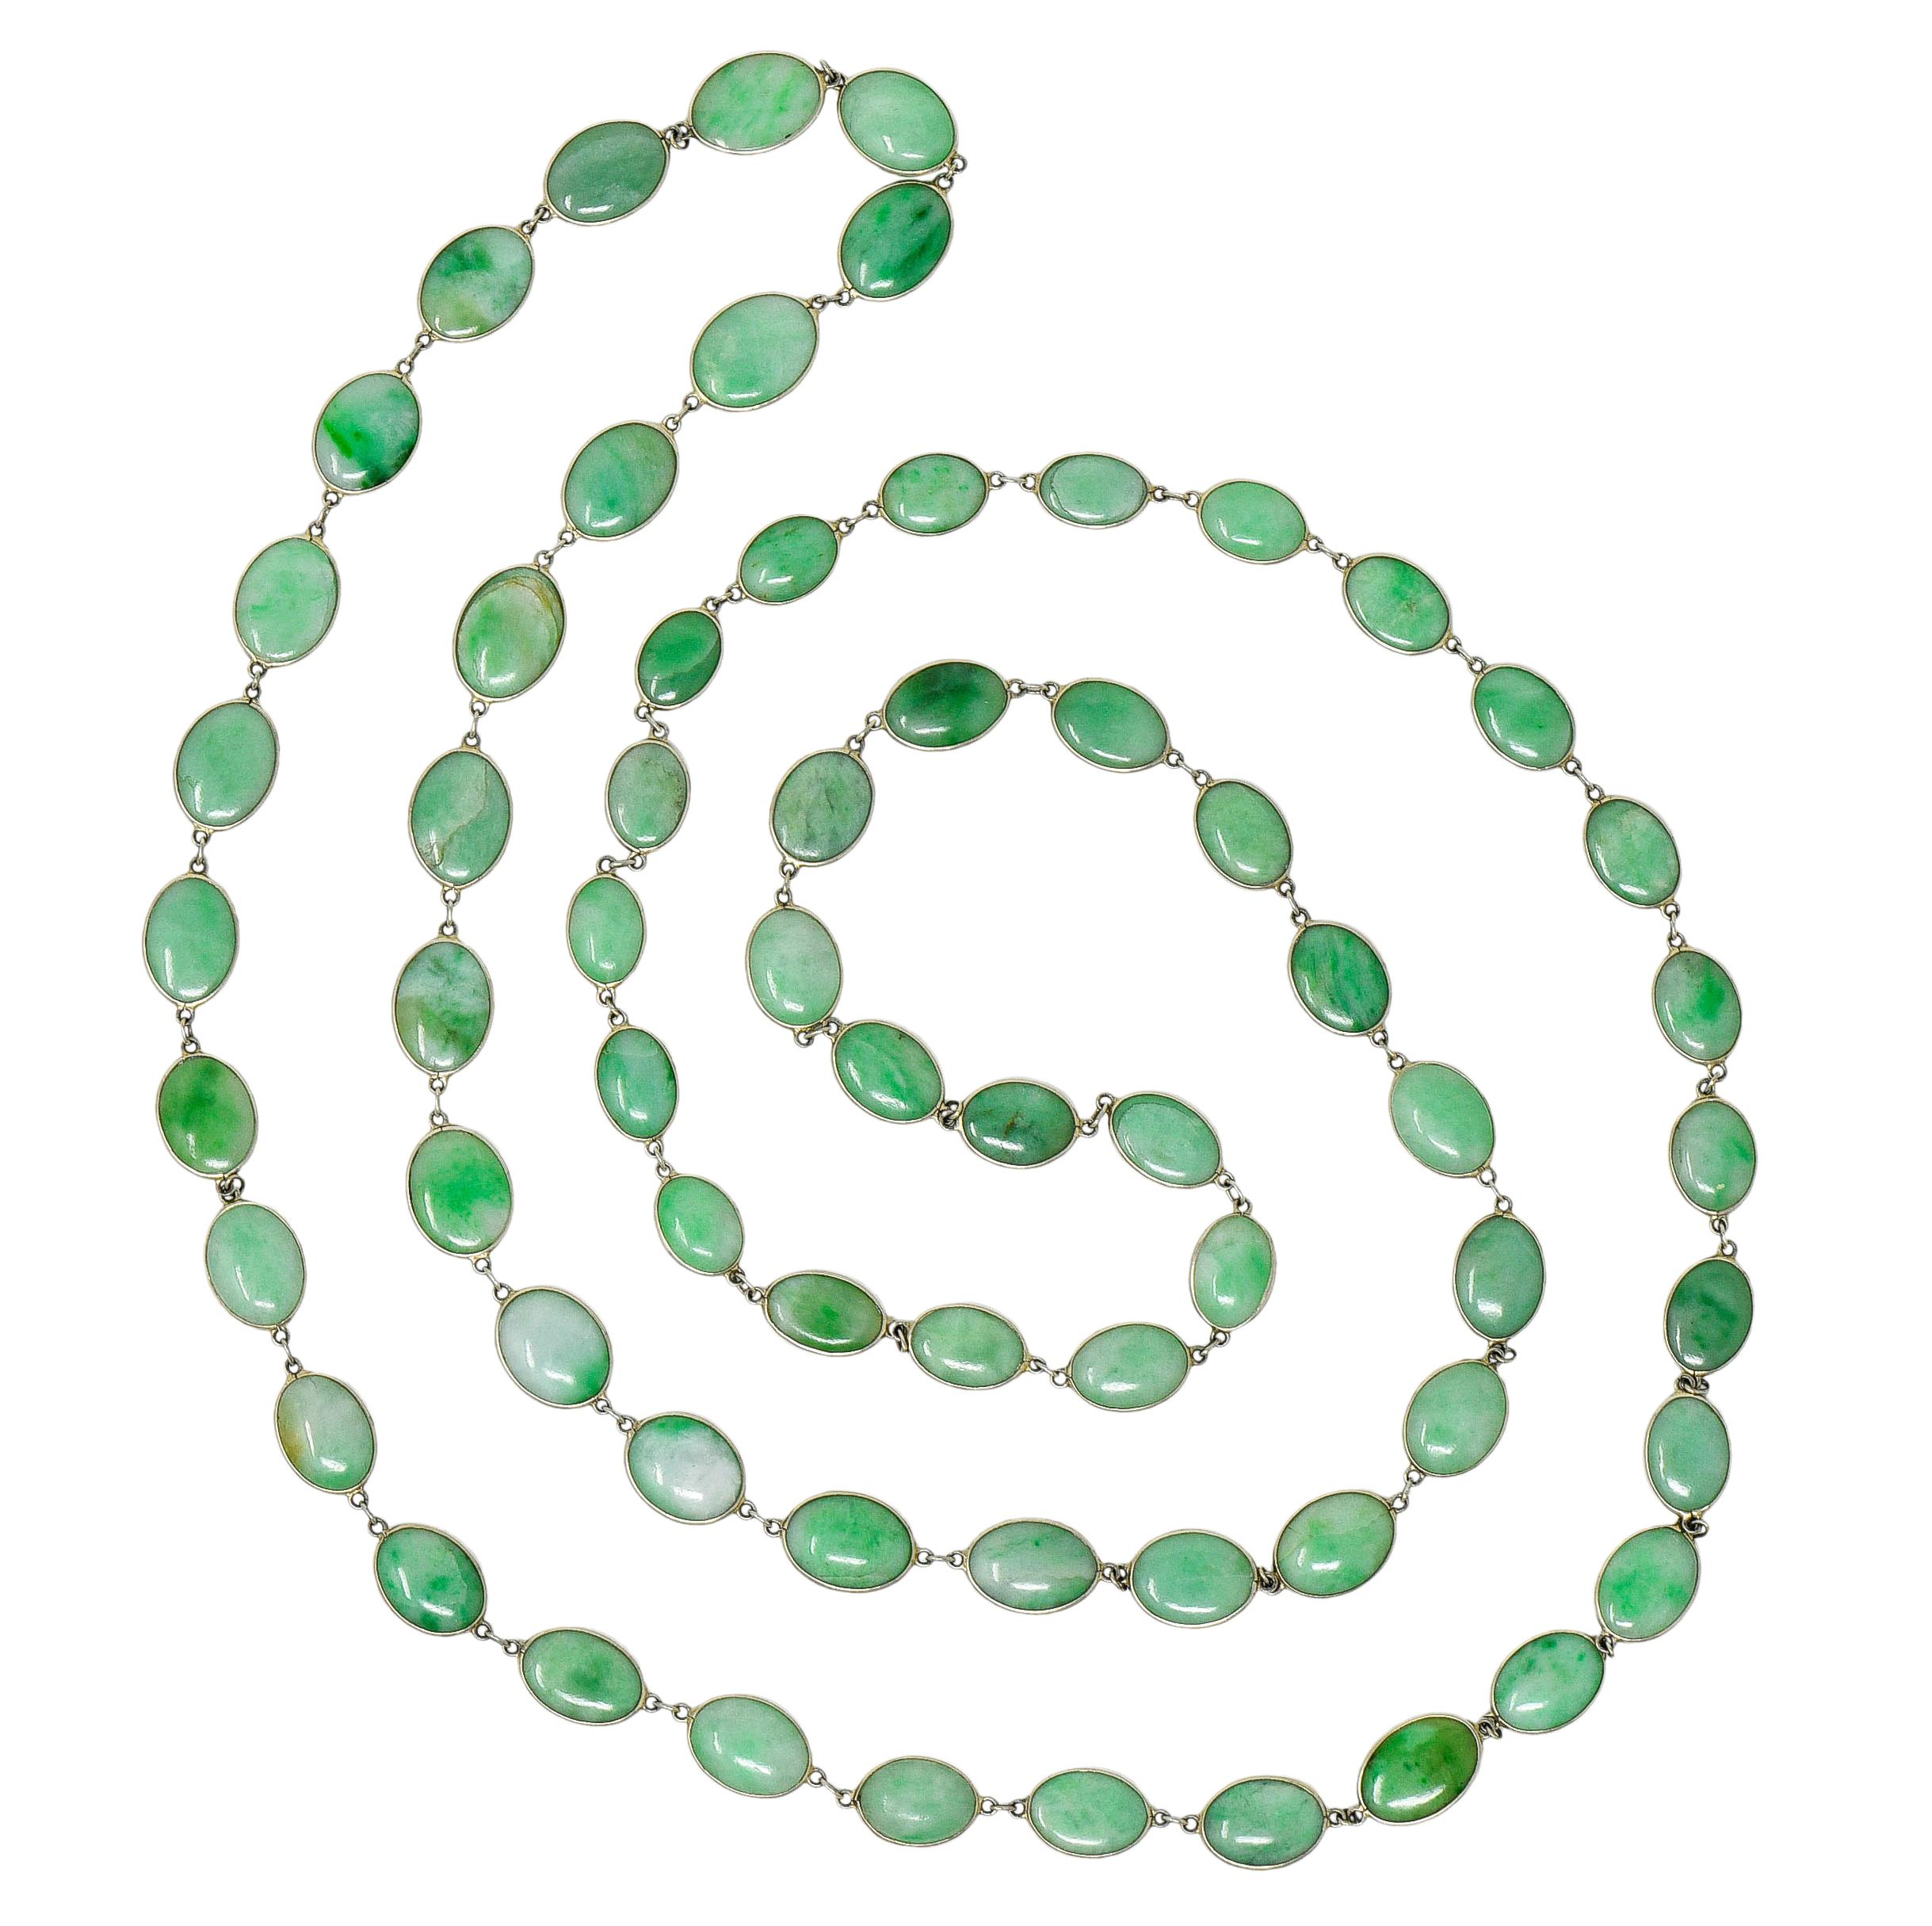 Eternity style necklace is comprised of oval jade cabochon, double sided with slim profile height

Bezel set in white gold and graduating in size from 11.0 x 8.0 mm to 14.0 x 10.0 mm

Translucent with dark green to very light green mottled color,